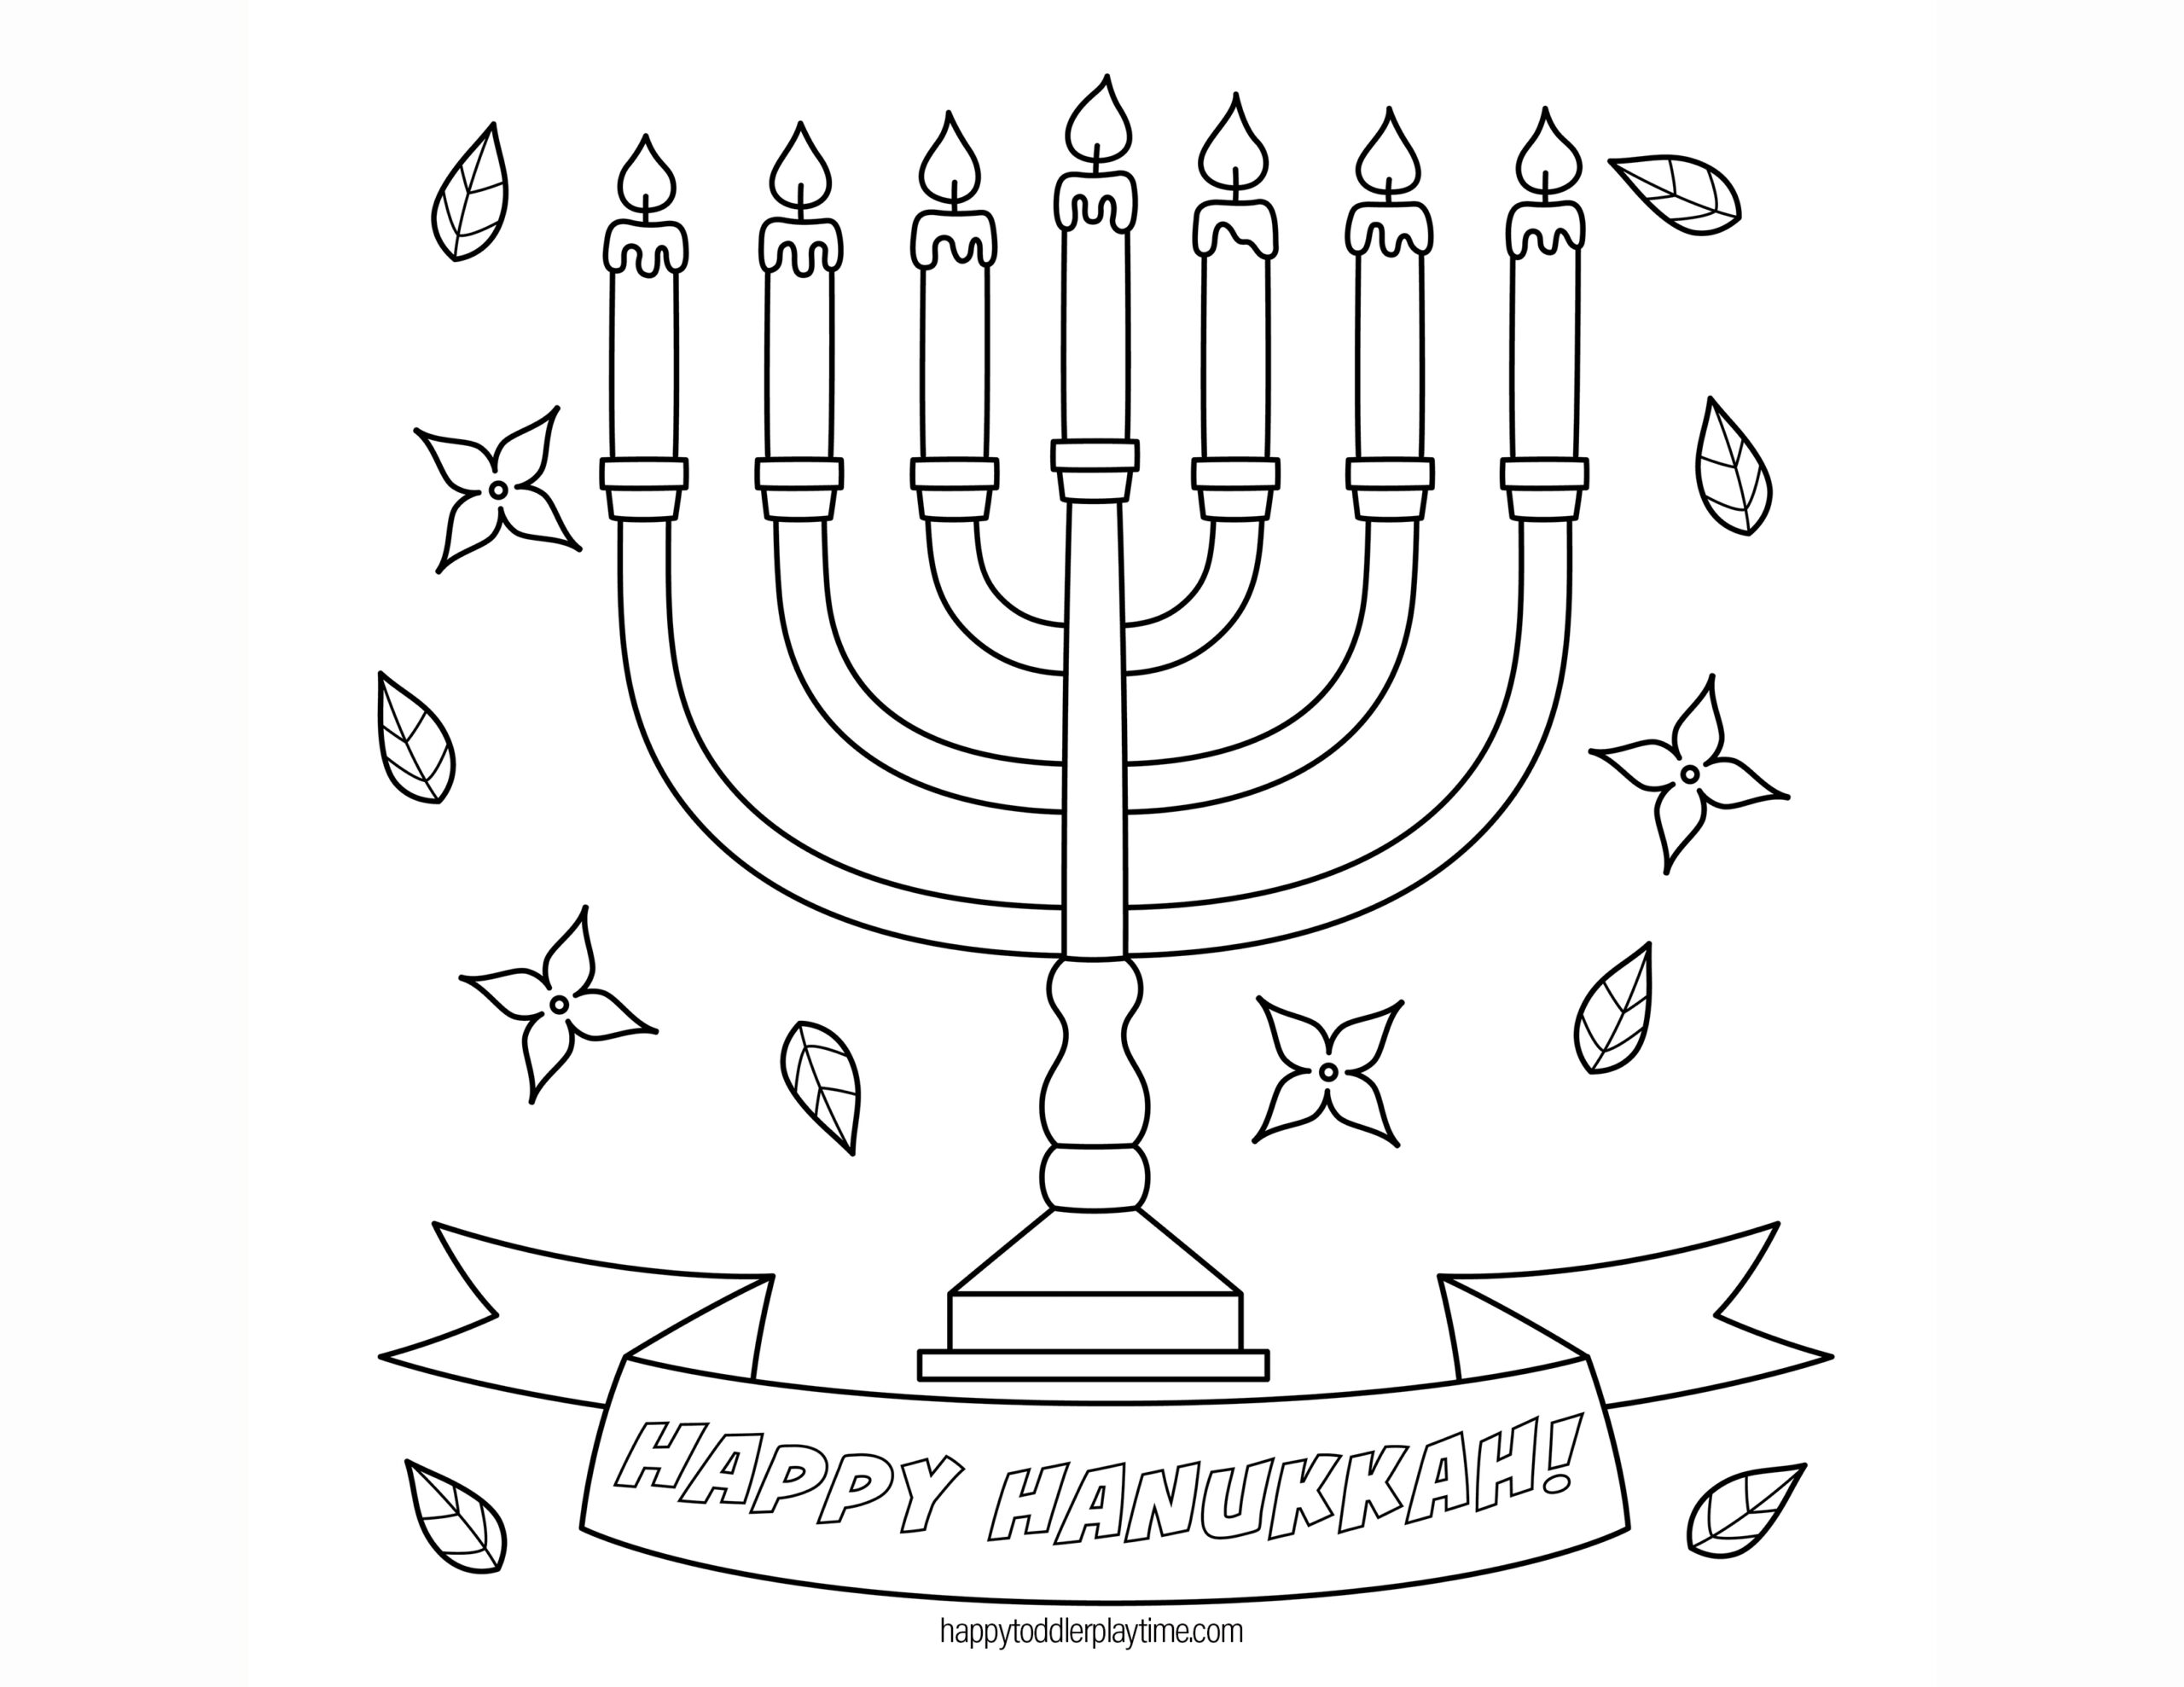 Free printable hanukkah coloring pages a festival of lights and colors